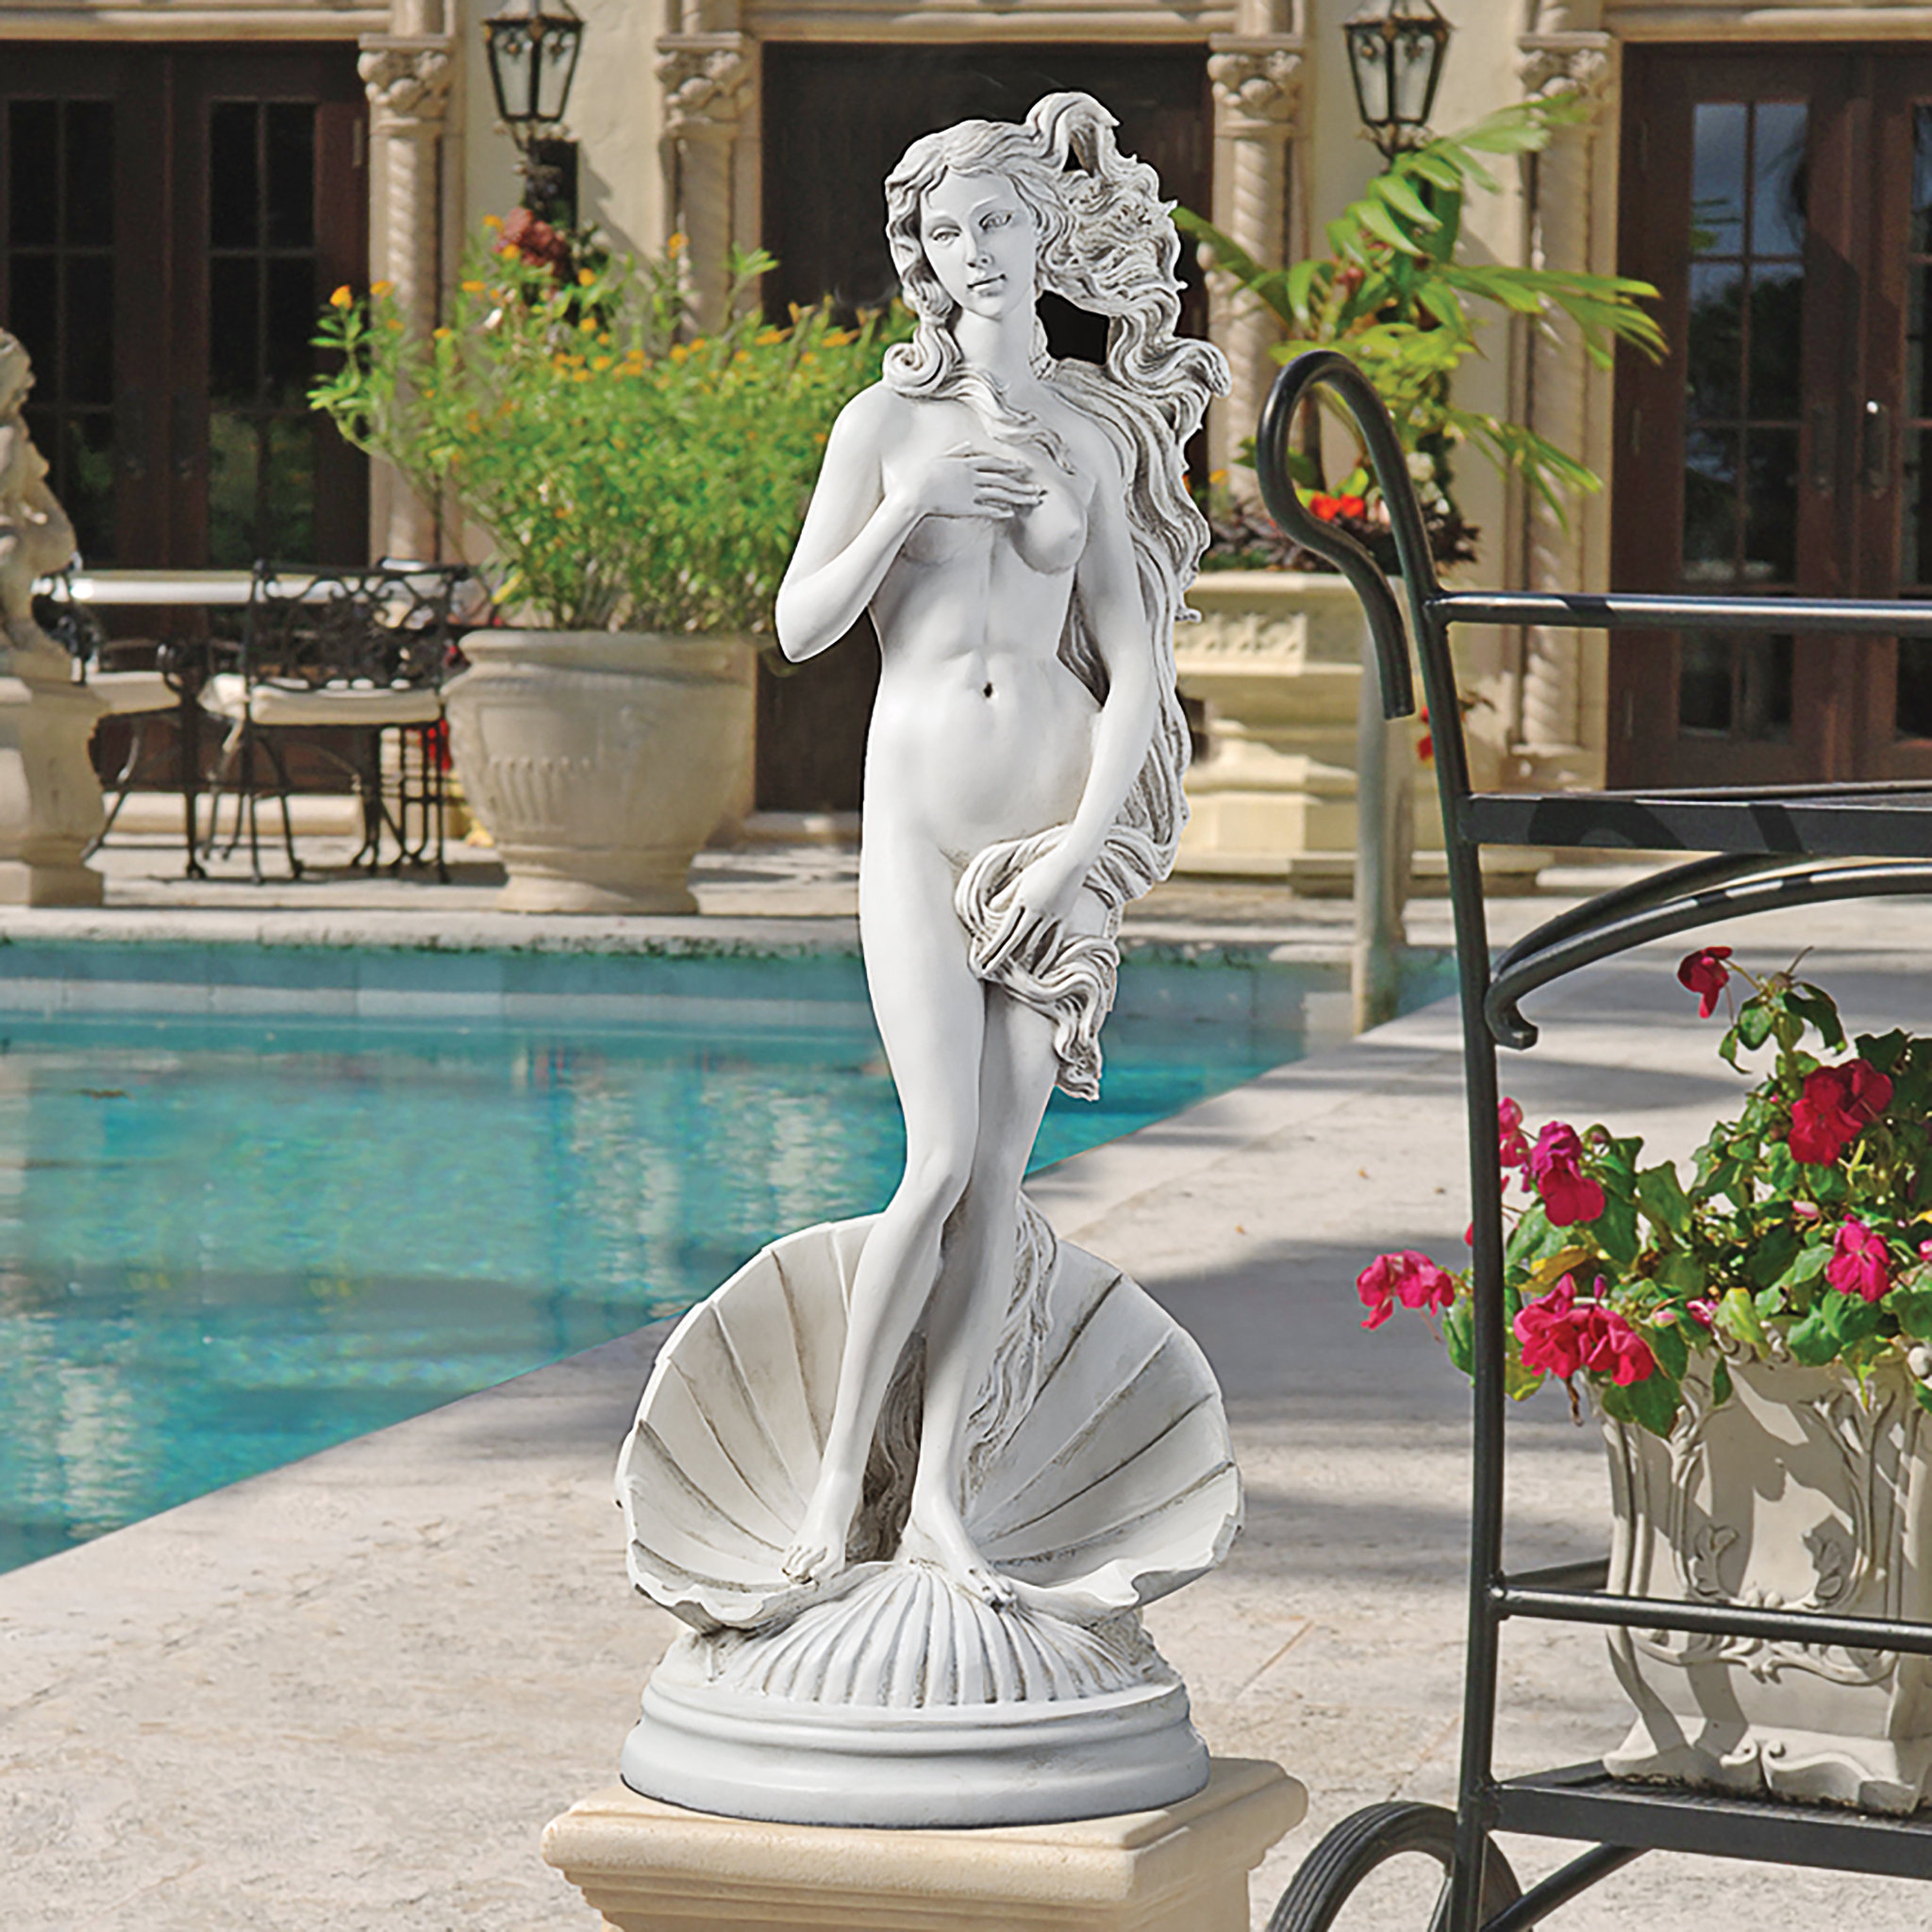 Usher in the beauty of Venus with this true investment in garden art! 